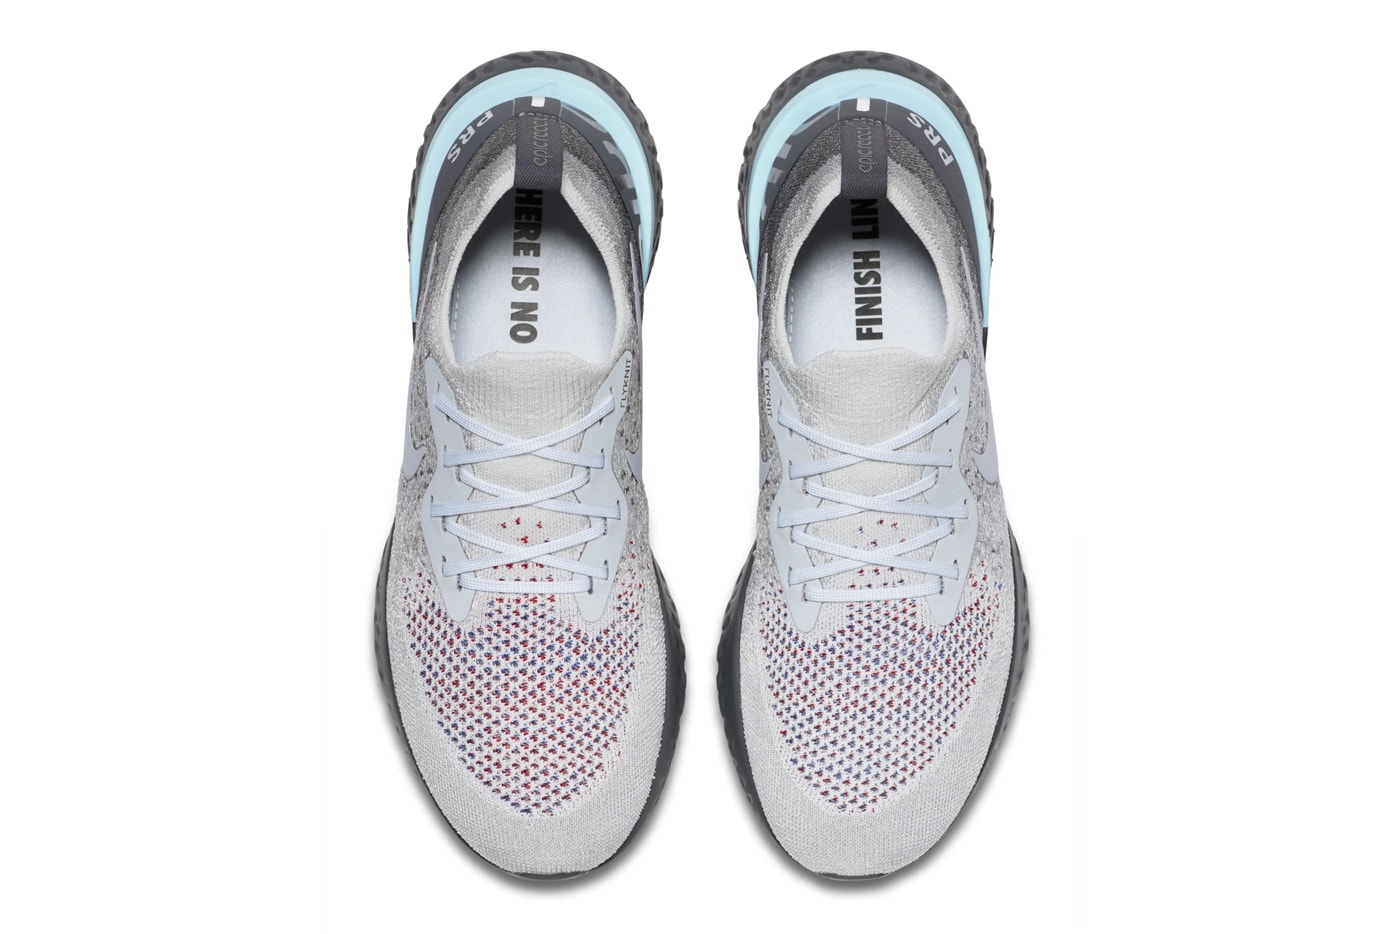 Nike Epic React Flyknit "Paris" "Light Cream/Wolf Grey" release date info price colorway sneaker europe purchase us 